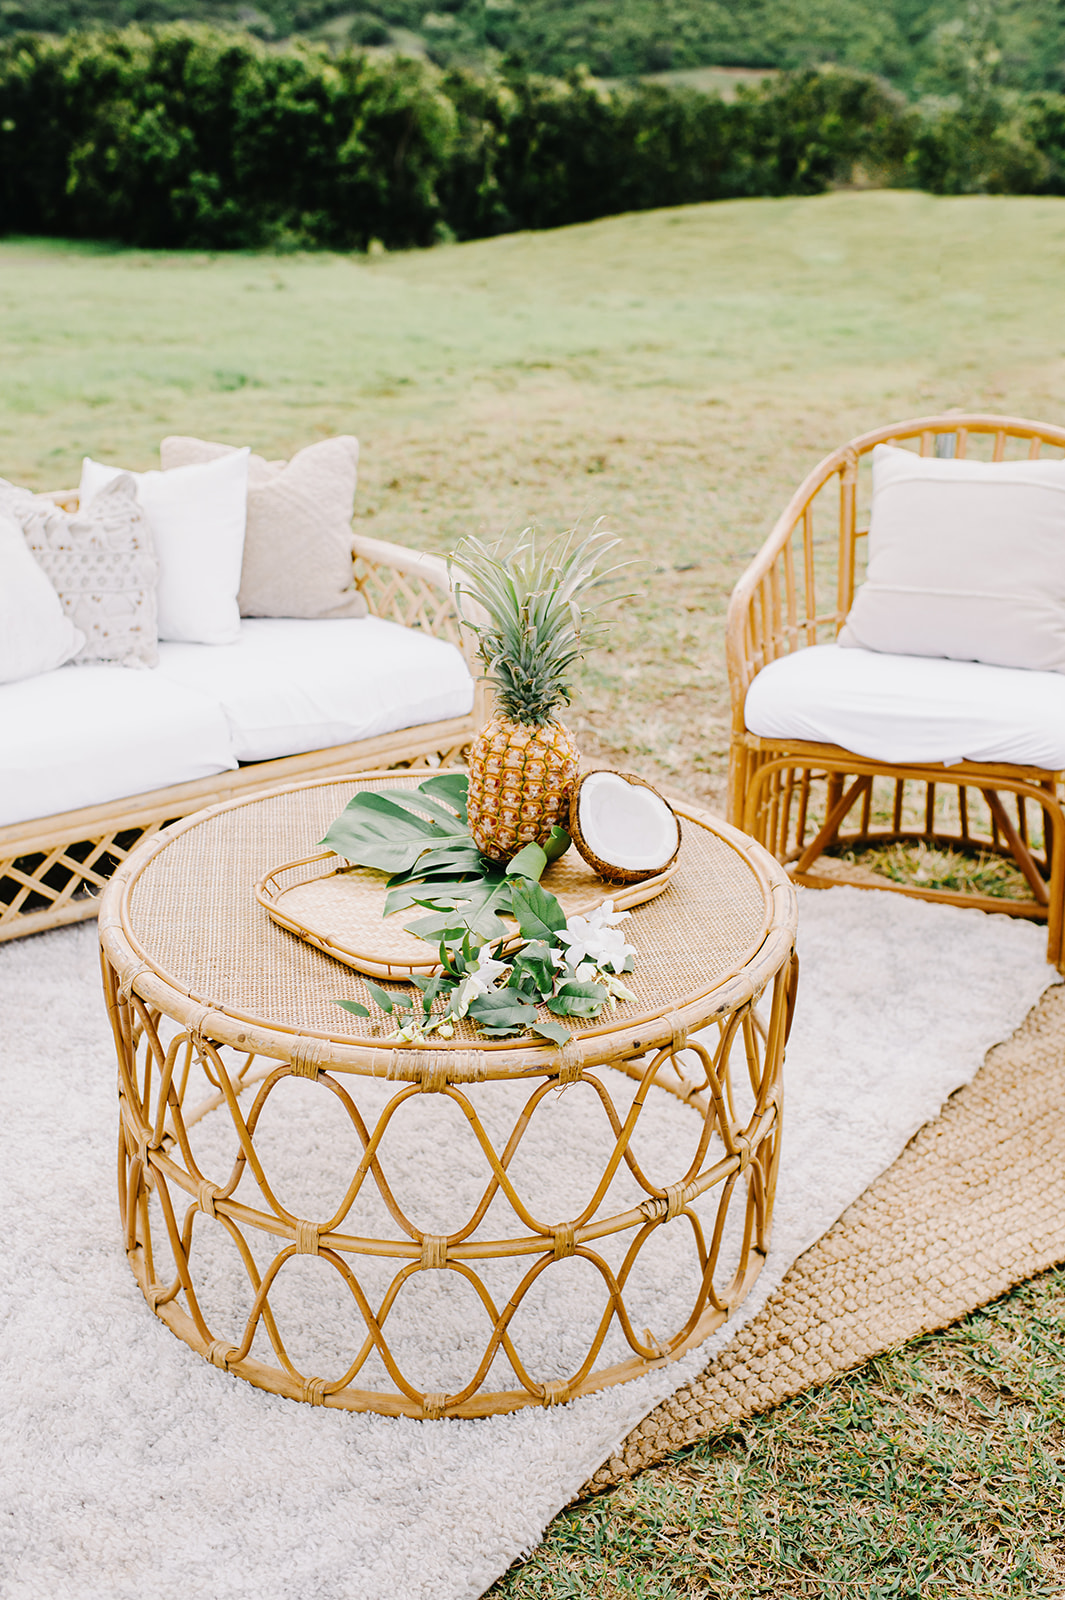 Tropical elegance in the reception setup featuring warm rattan furniture and vibrant pineapples L Hewitt Photography